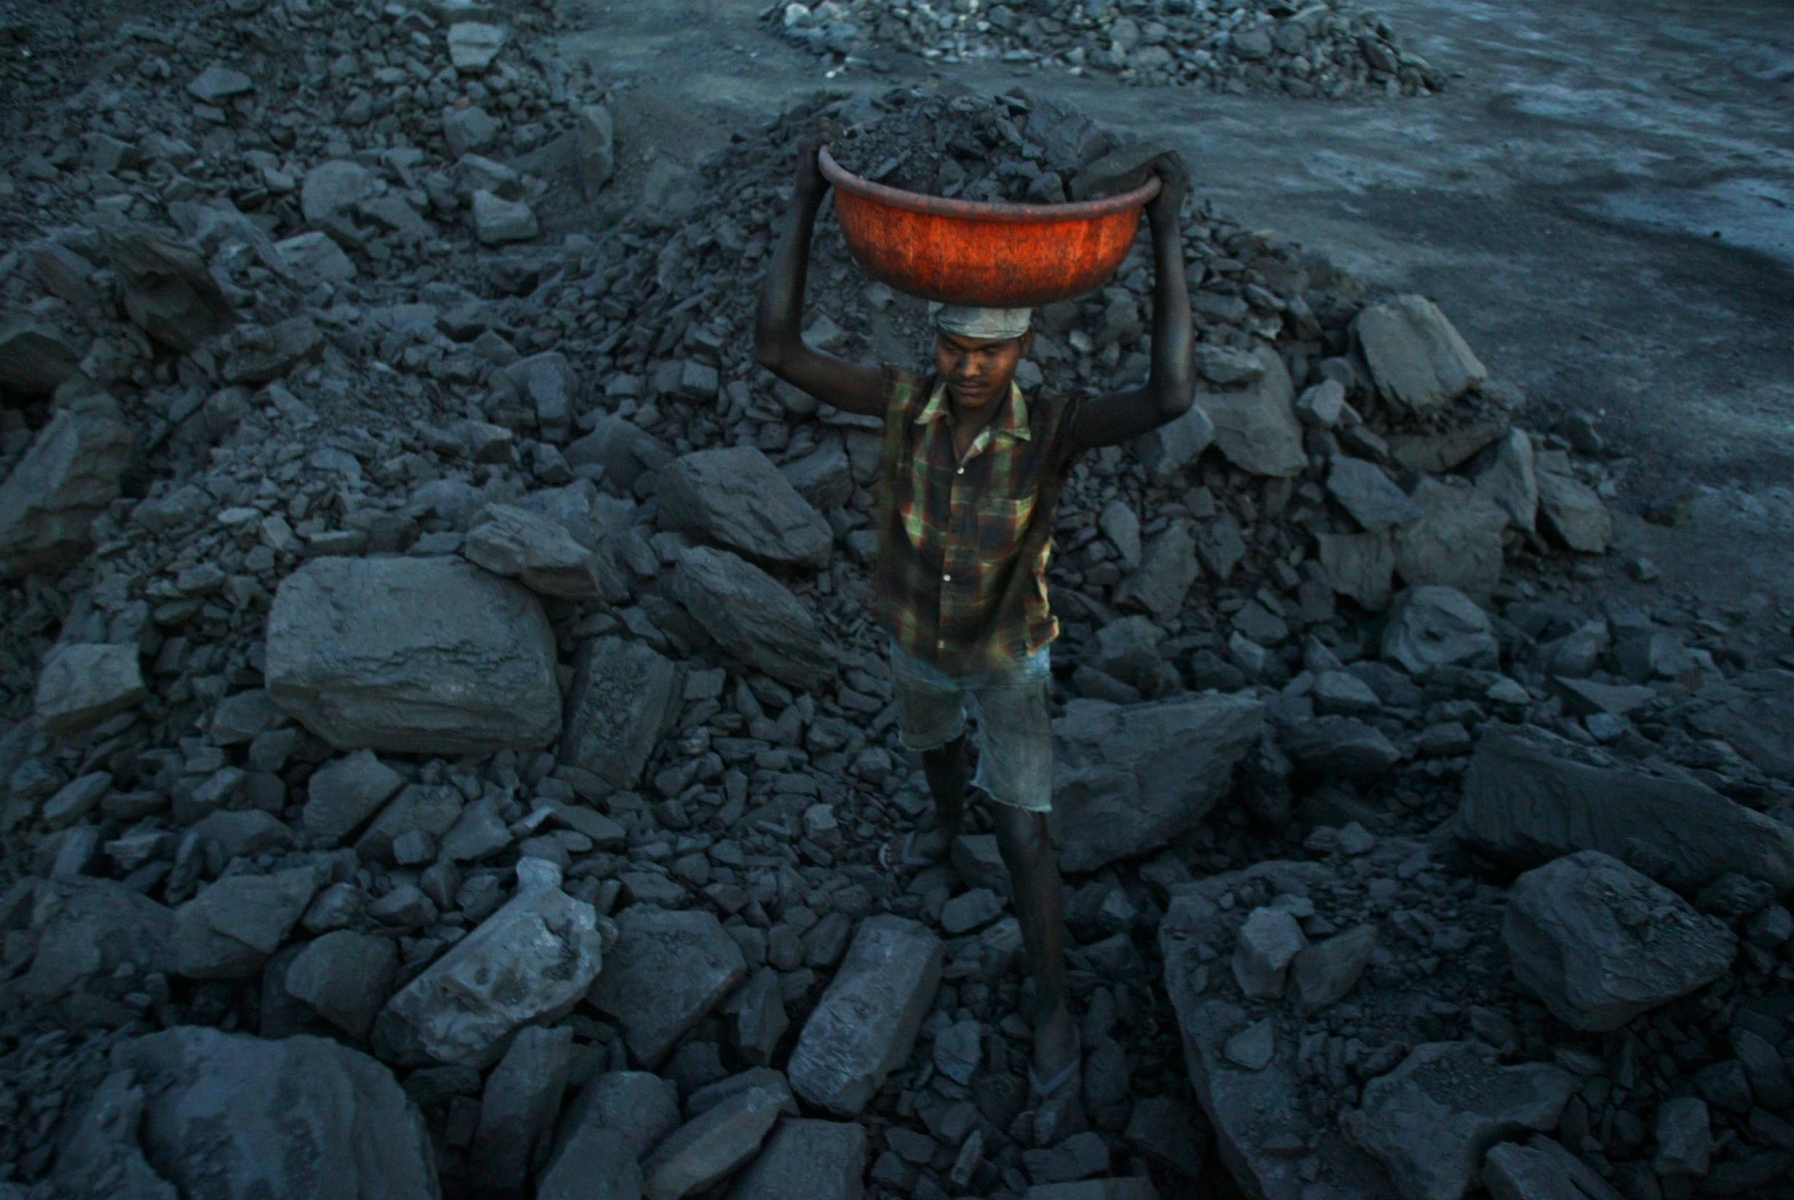 An Indian laborer carries coal as he works in a coal depot near Manguli Chhak in Cuttack district, Orissa, India, Monday, April 12, 2010. India's industrial output grew 15.1 percent in February, less than expected, after government moves to unwind stimulus measures in the face of rising inflation, official figures showed Monday. (AP Photo/Biswaranjan Rout) India Industrial Production